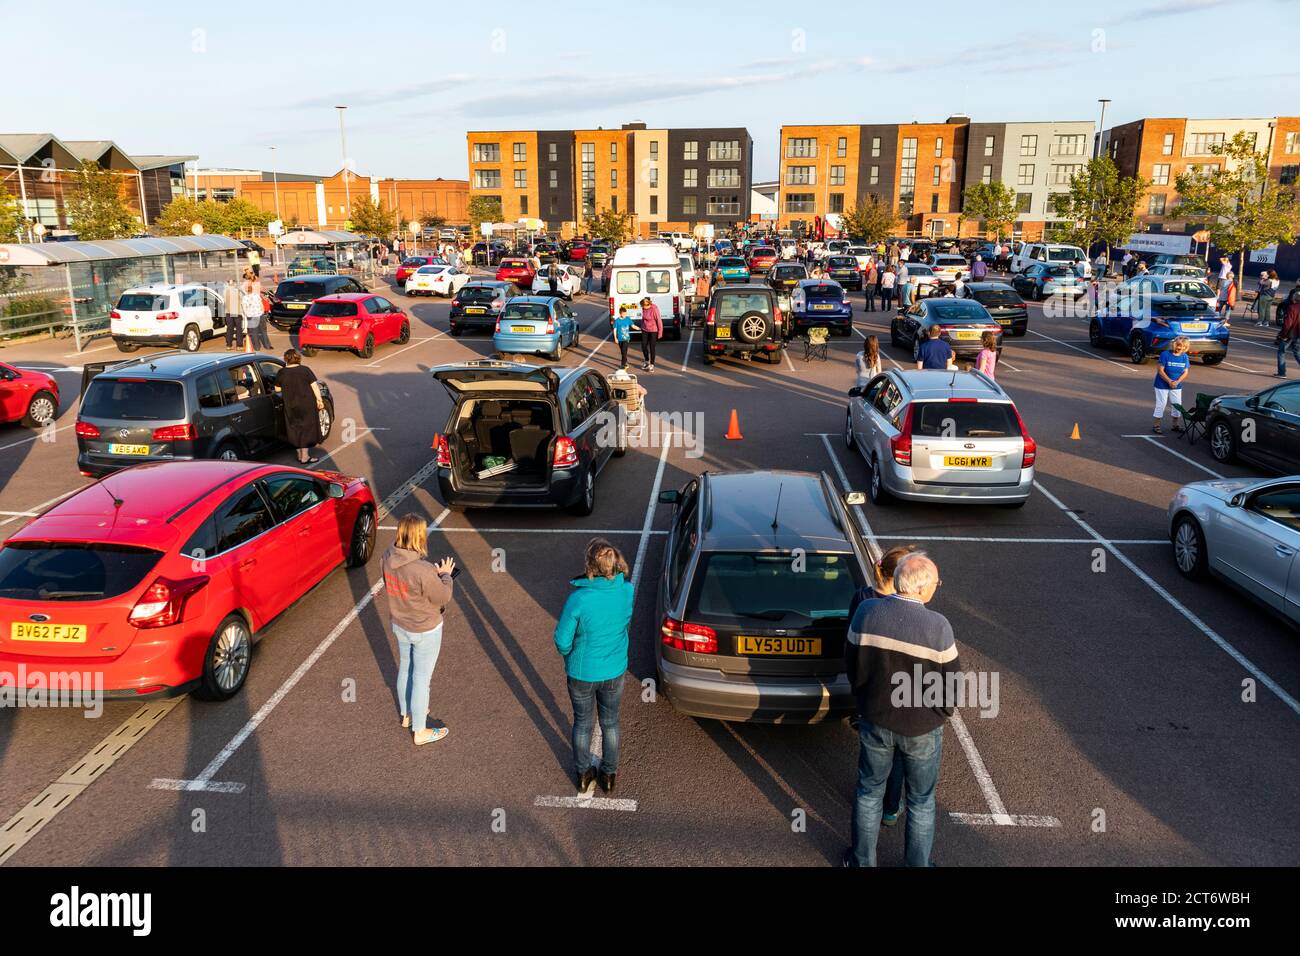 A drive in church service complying with Covid 19 restrictions on a Sunday evening in the car park of Sainsburys at Gloucester Quays, Gloucester UK Stock Photo